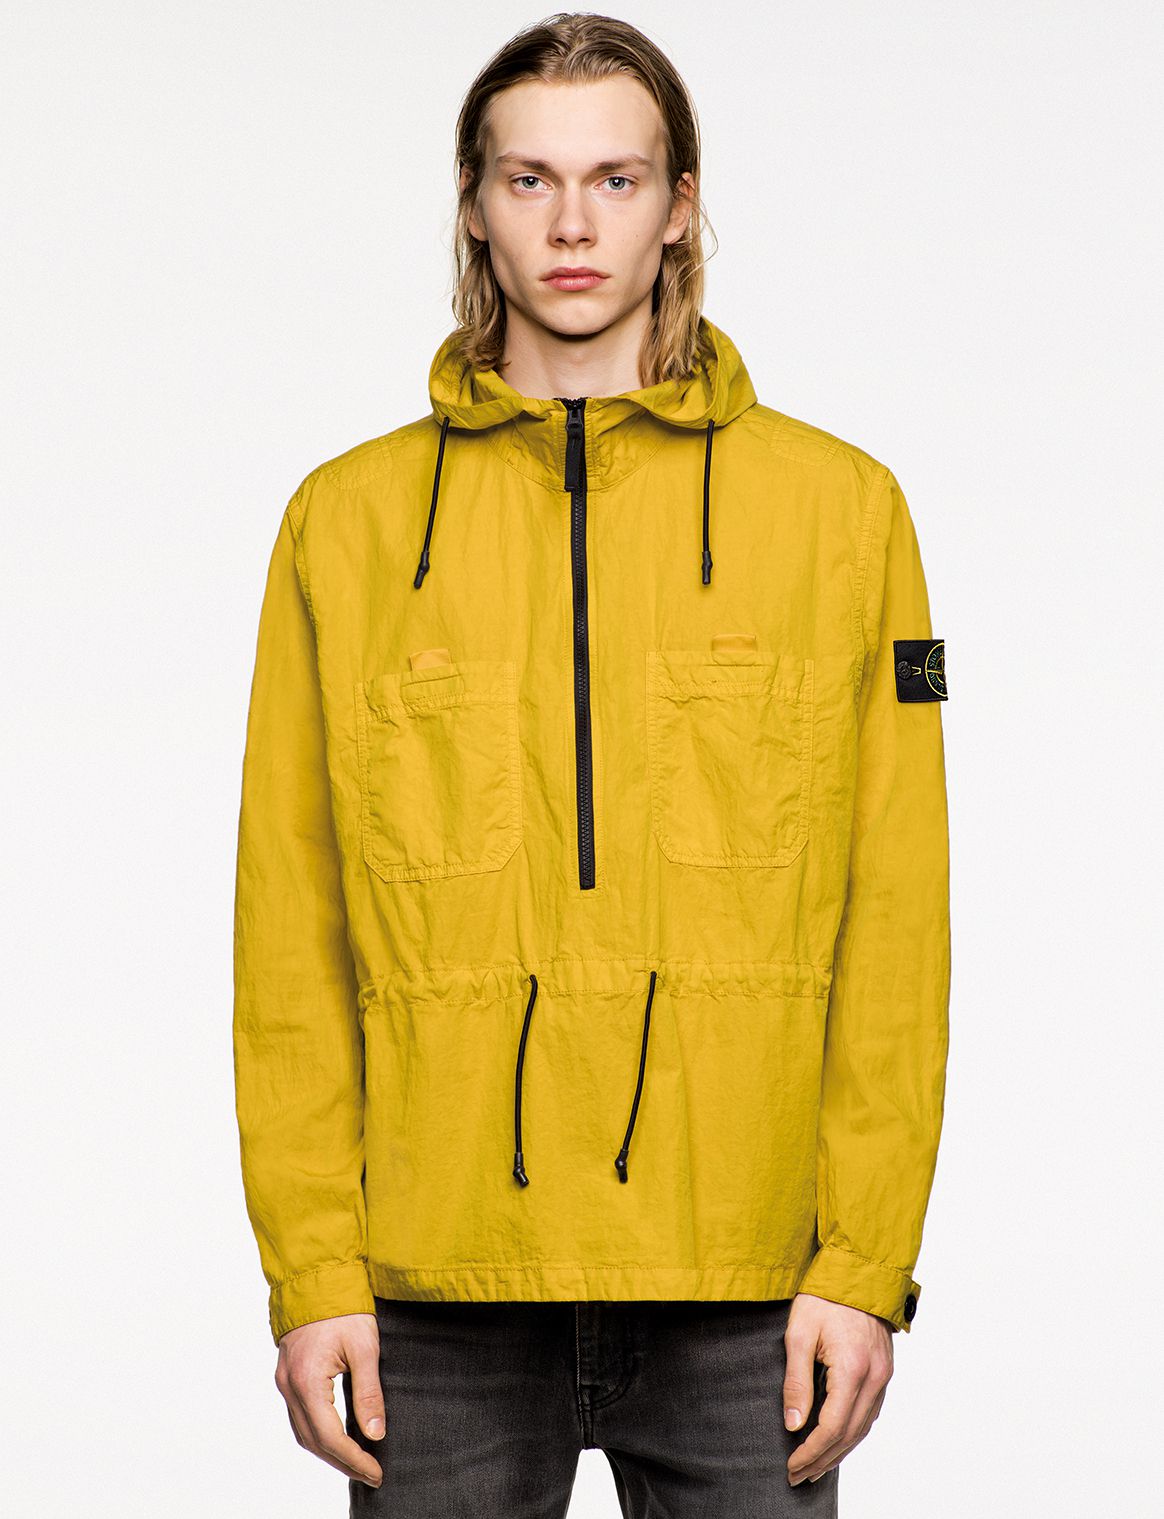 Stone Island releases its AW18 Look Book - ICON